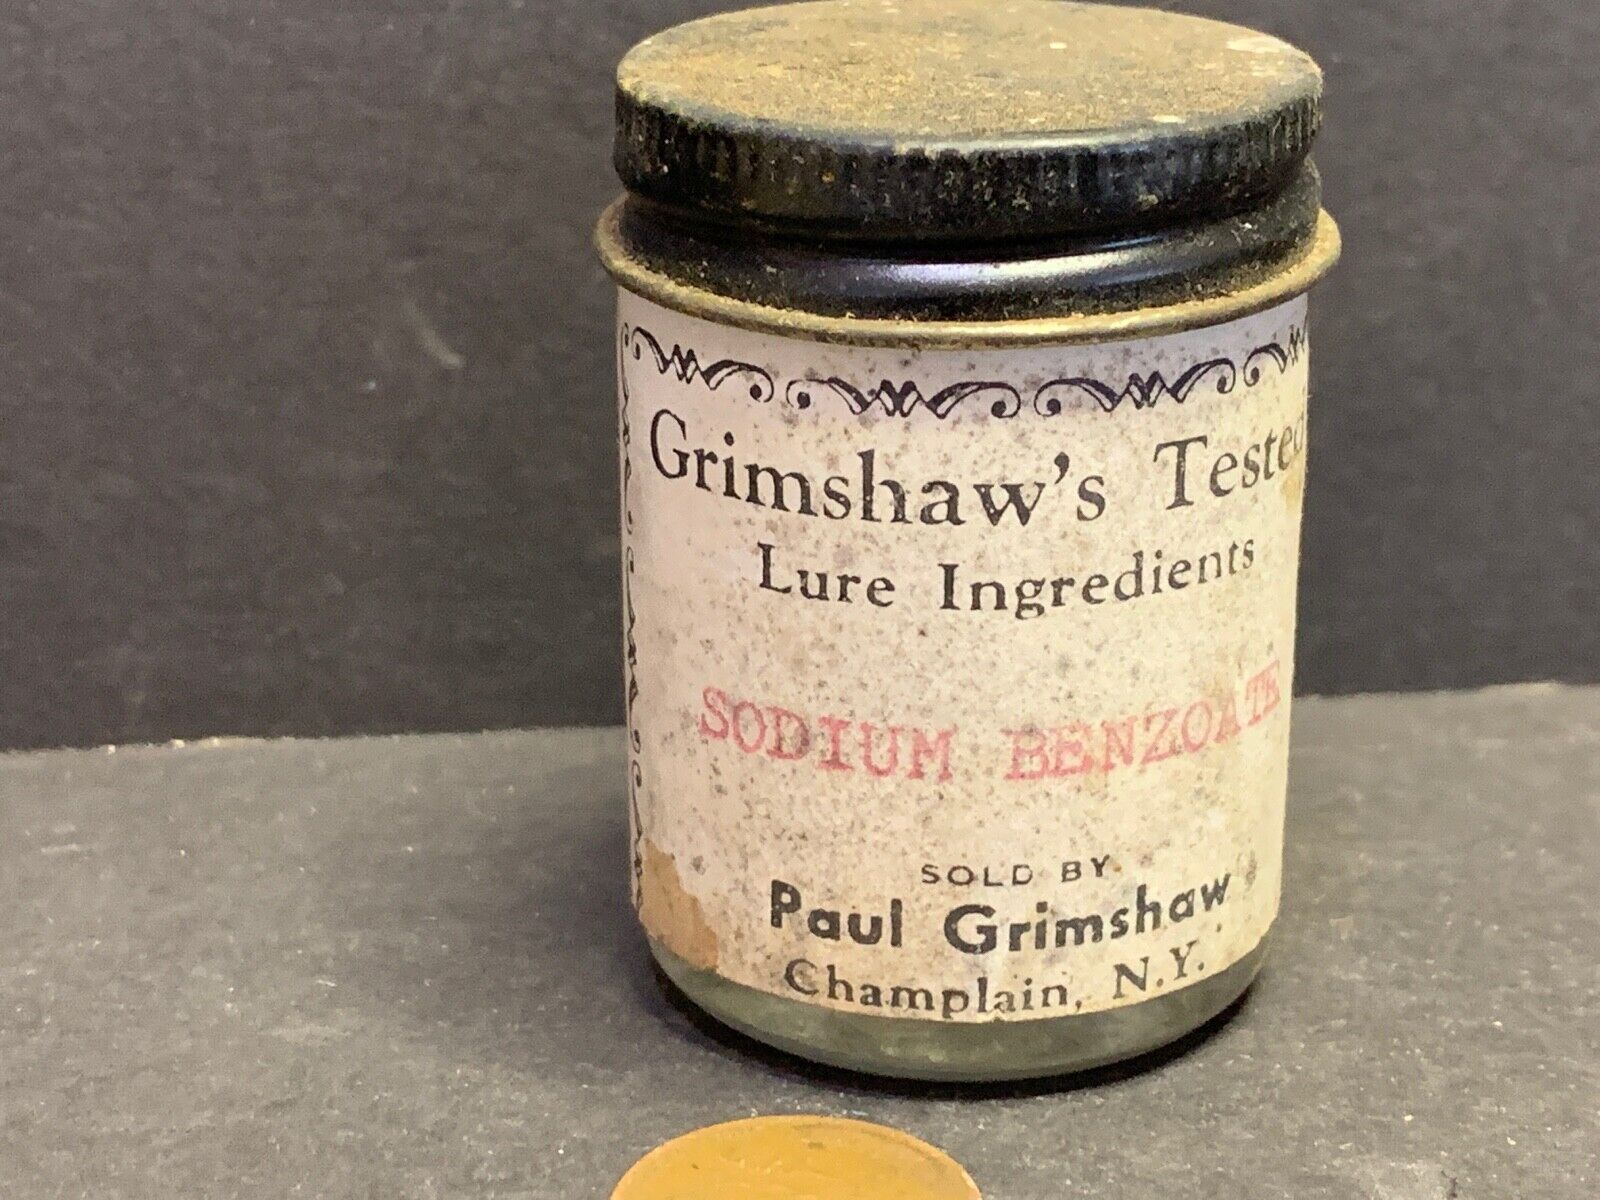 Vintage Trapping Scent, Grimshaw's Sodium Benzoate Lure Ingredient Champlain, NY